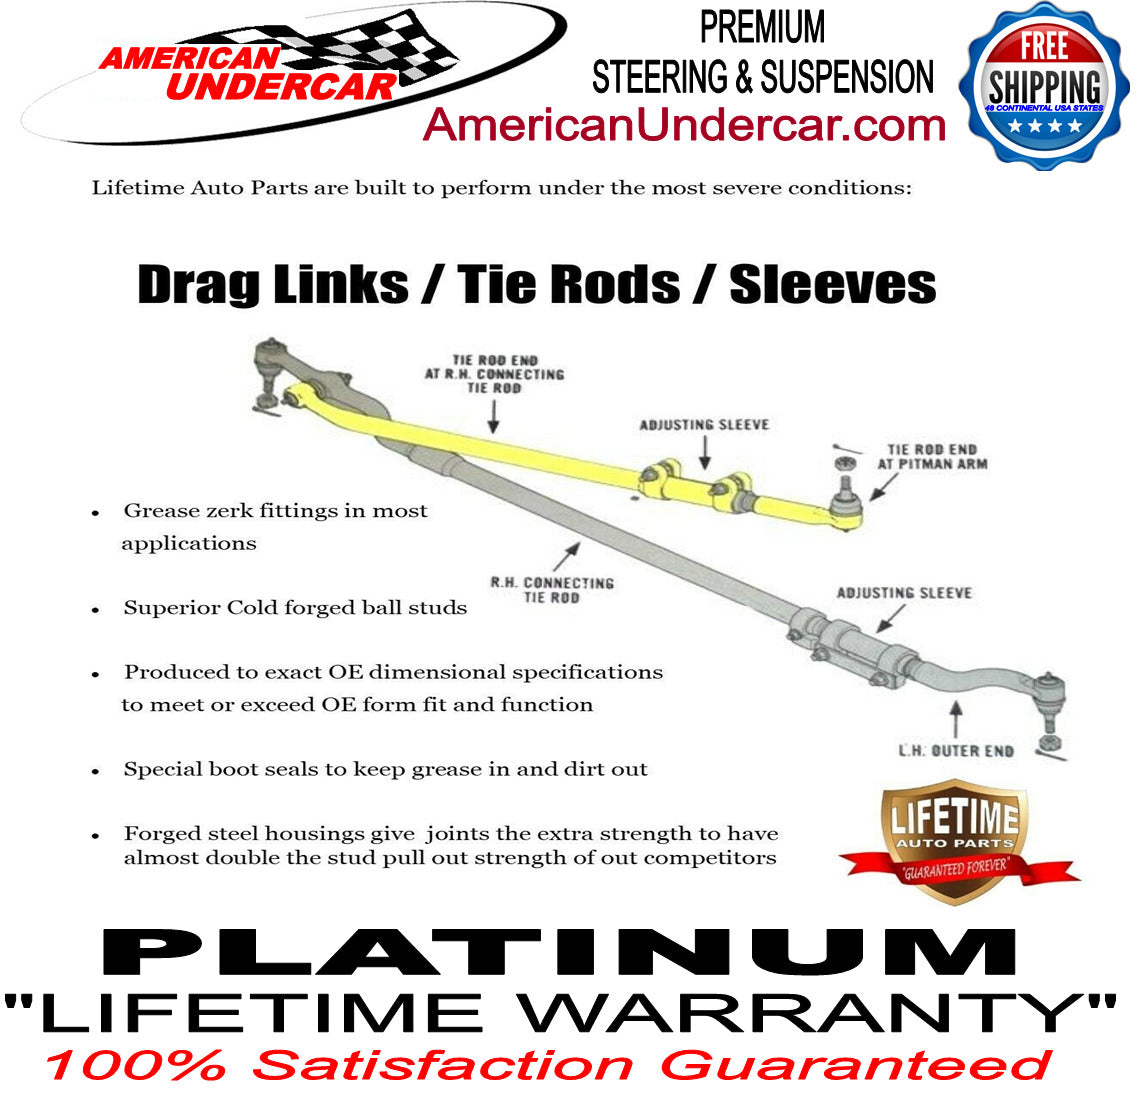 Lifetime Tie Rod Drag Link Sleeve Kit for 1999-2004 Ford F250, F350 Super Duty, Excursion 4x4